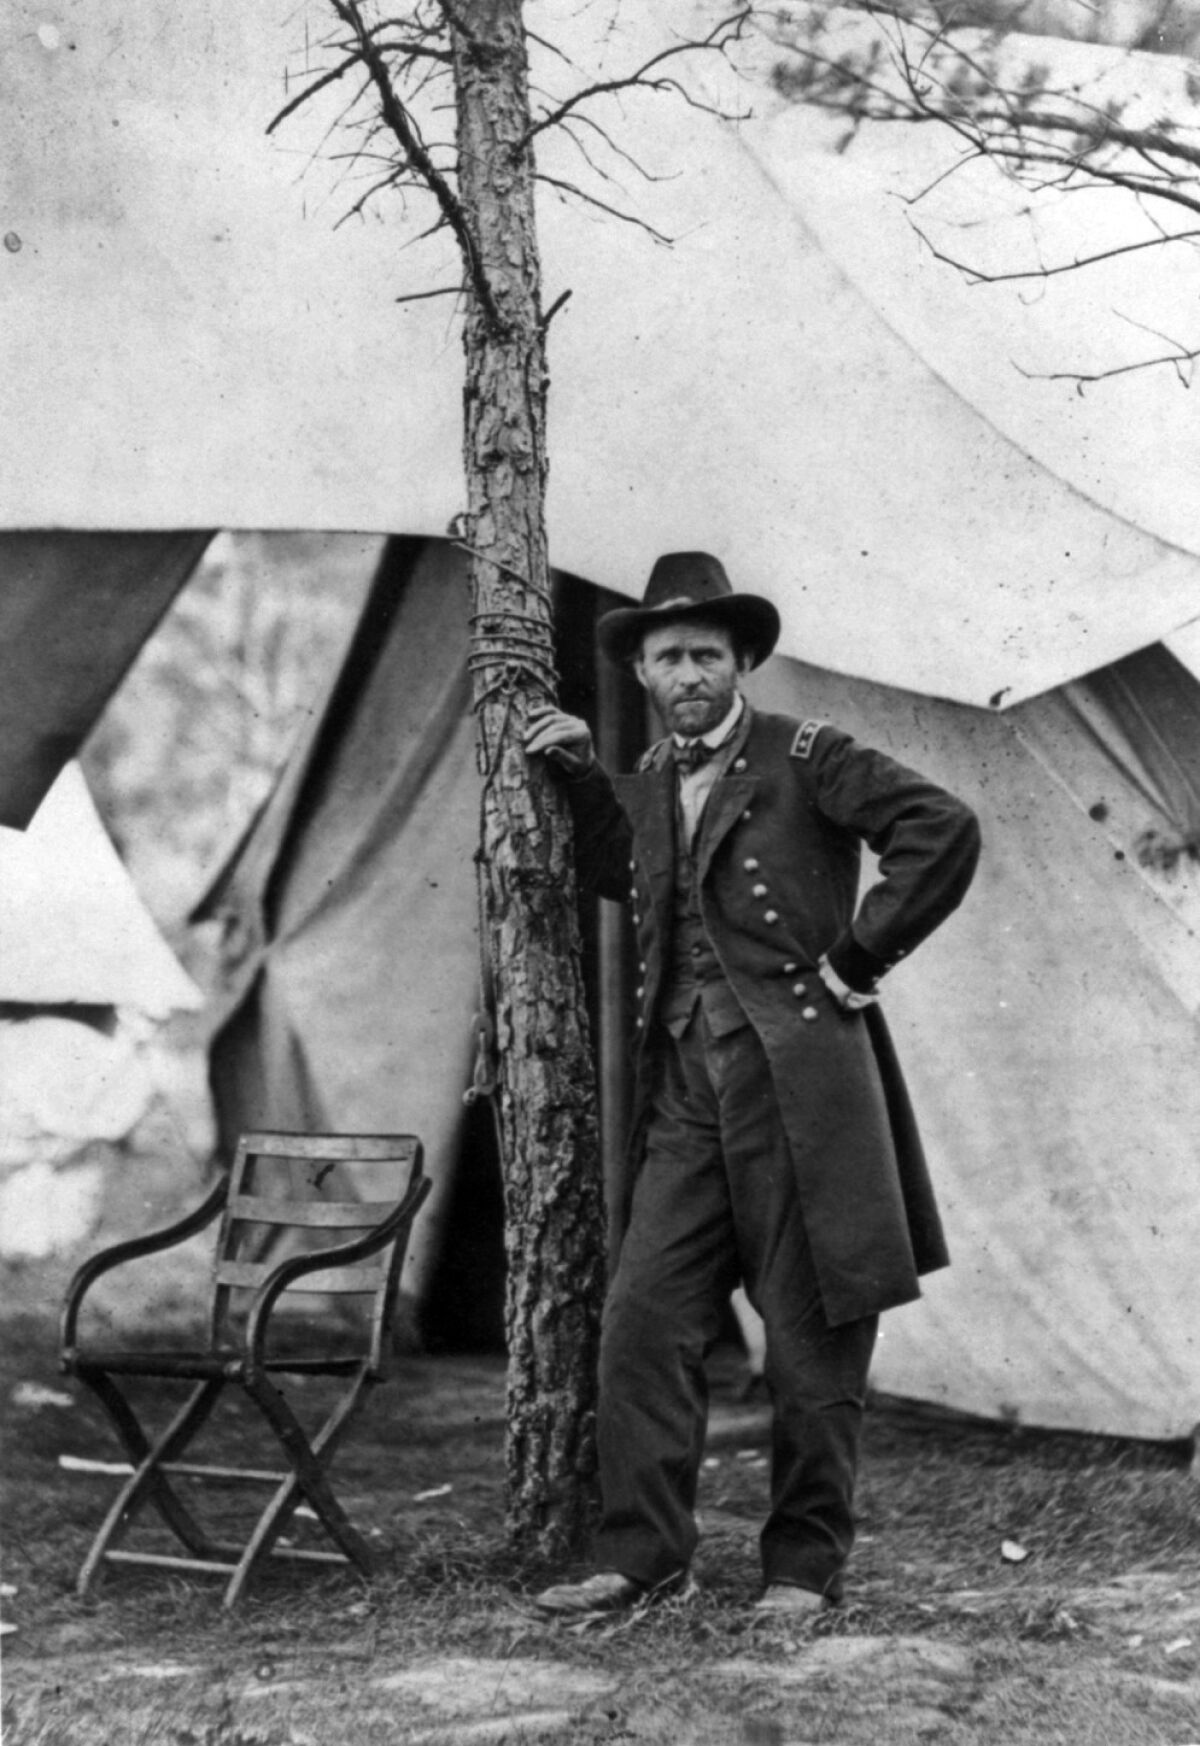 Ulysses S. Grant was commanding general of the U.S. Army during the Civil War before becoming the 18th president. 